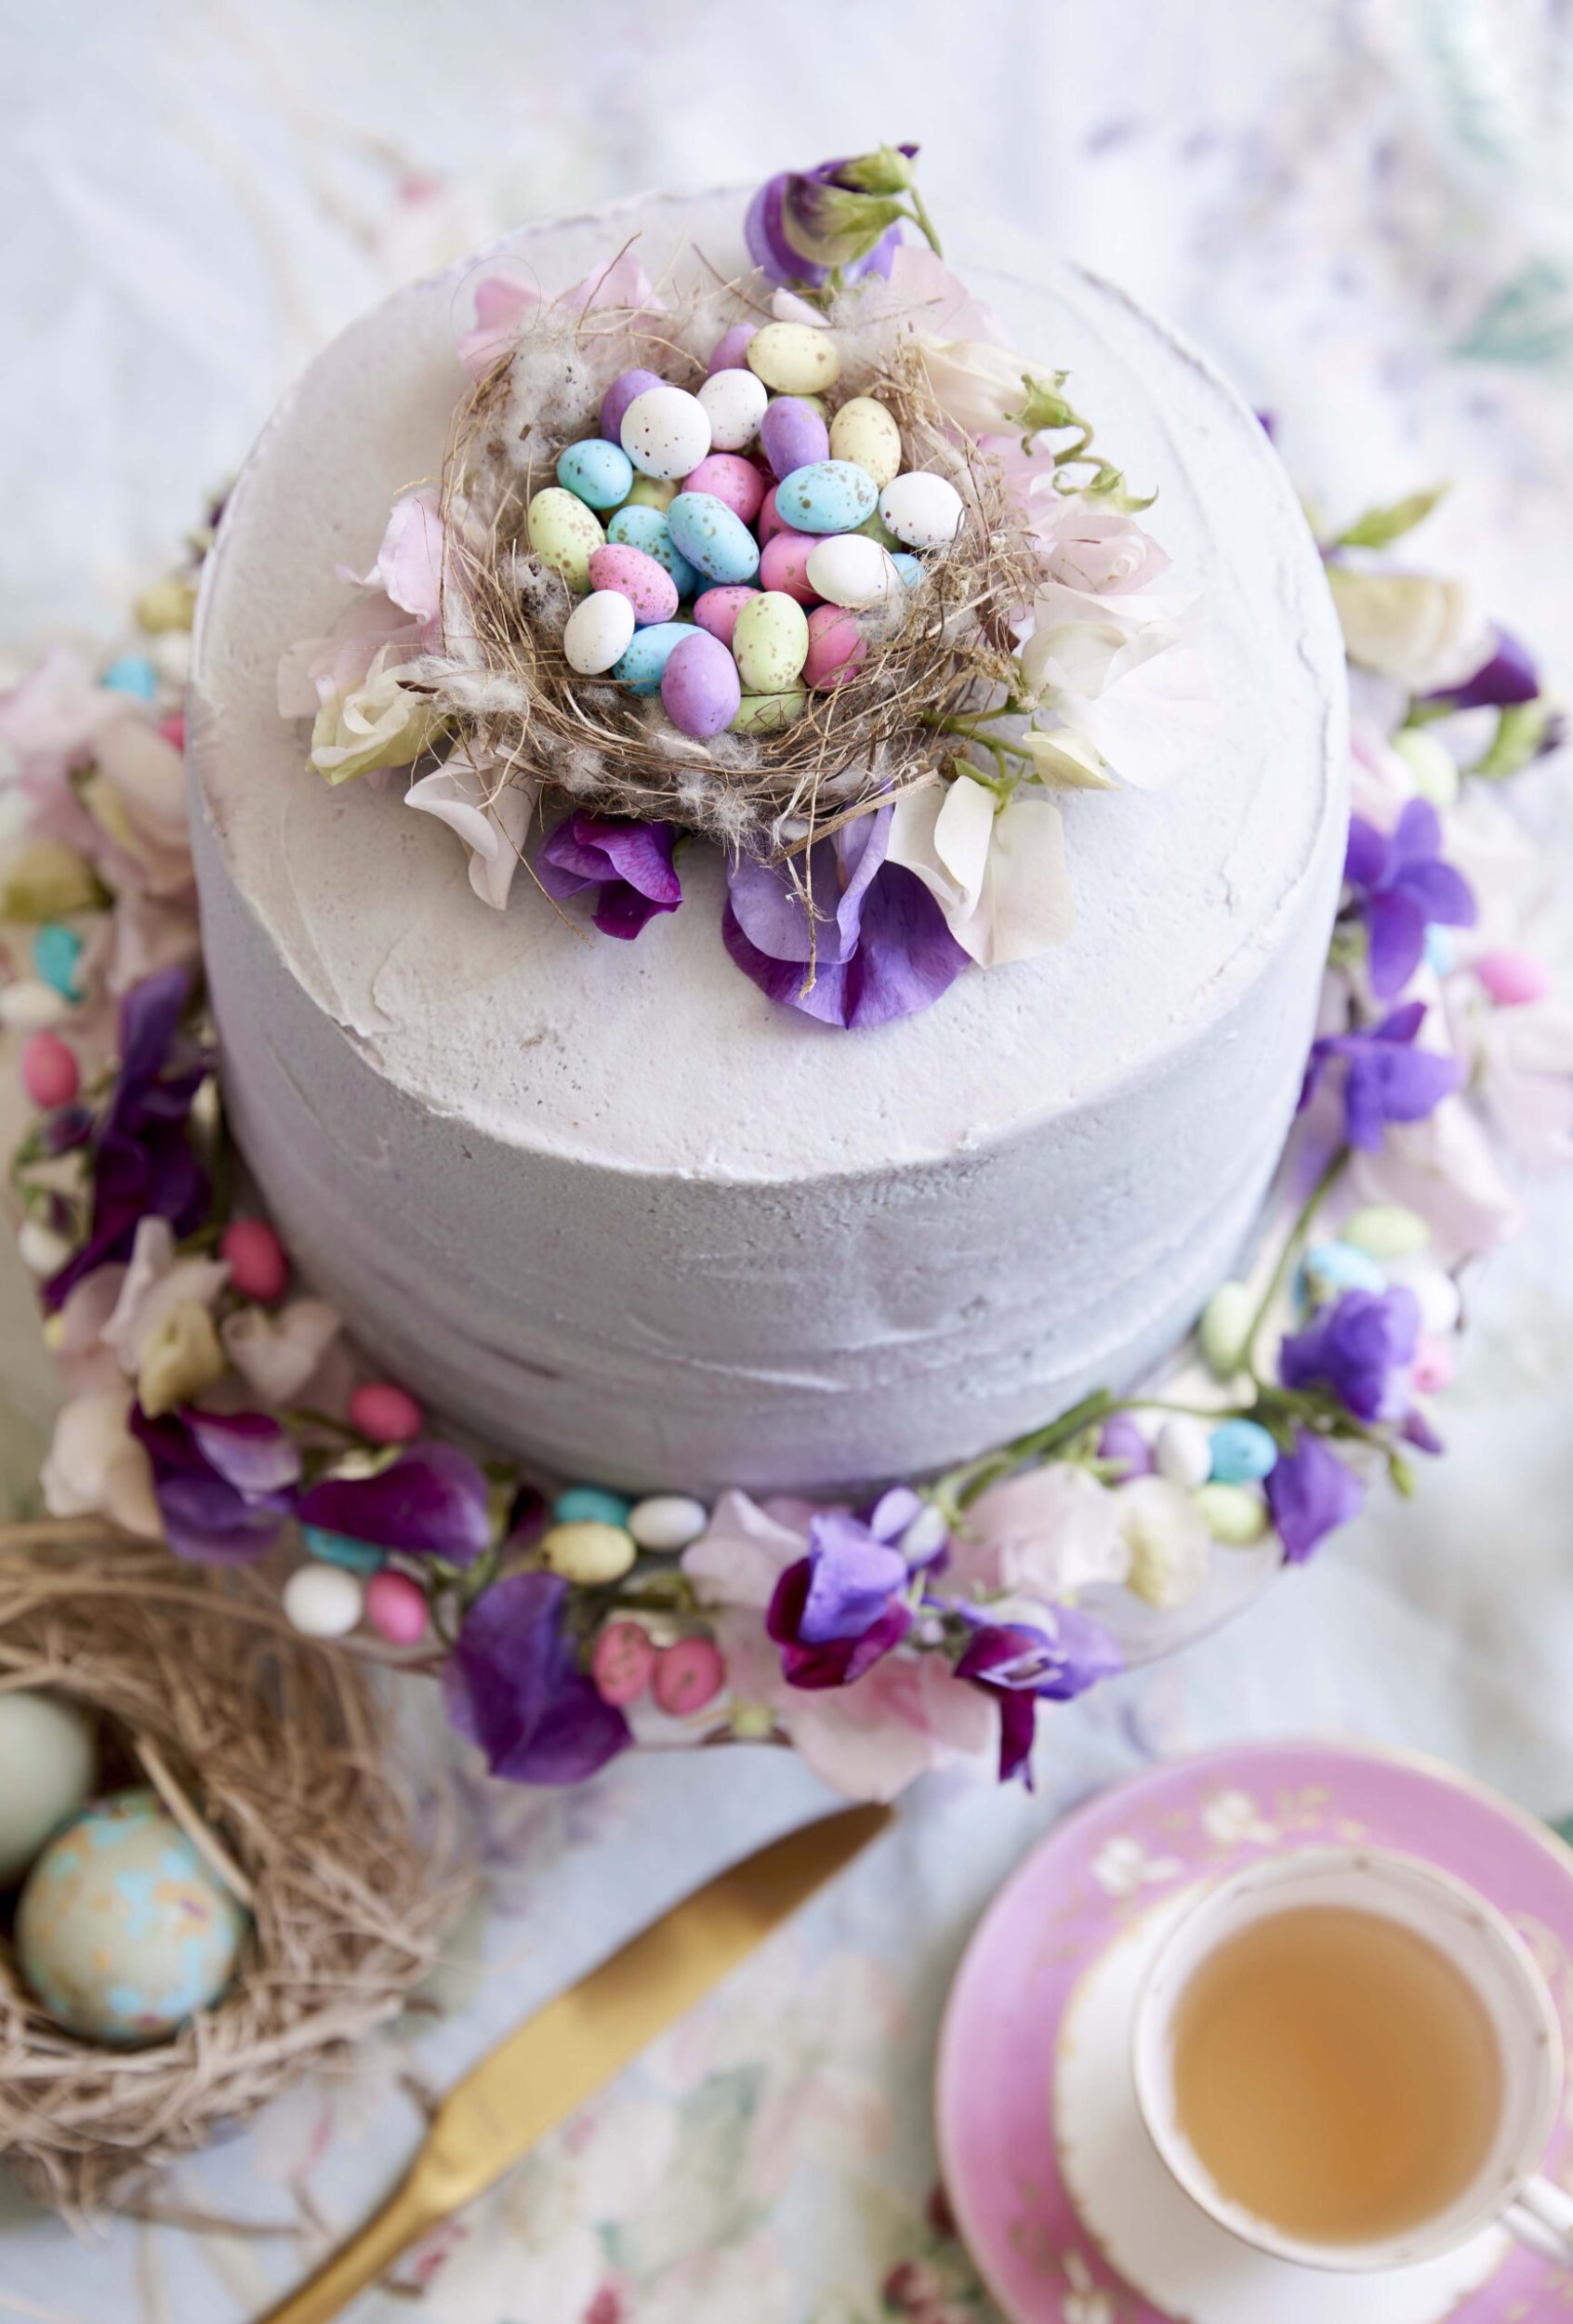 Cake with purple frosting, flowers and a bird's nest filled with Easter eggs